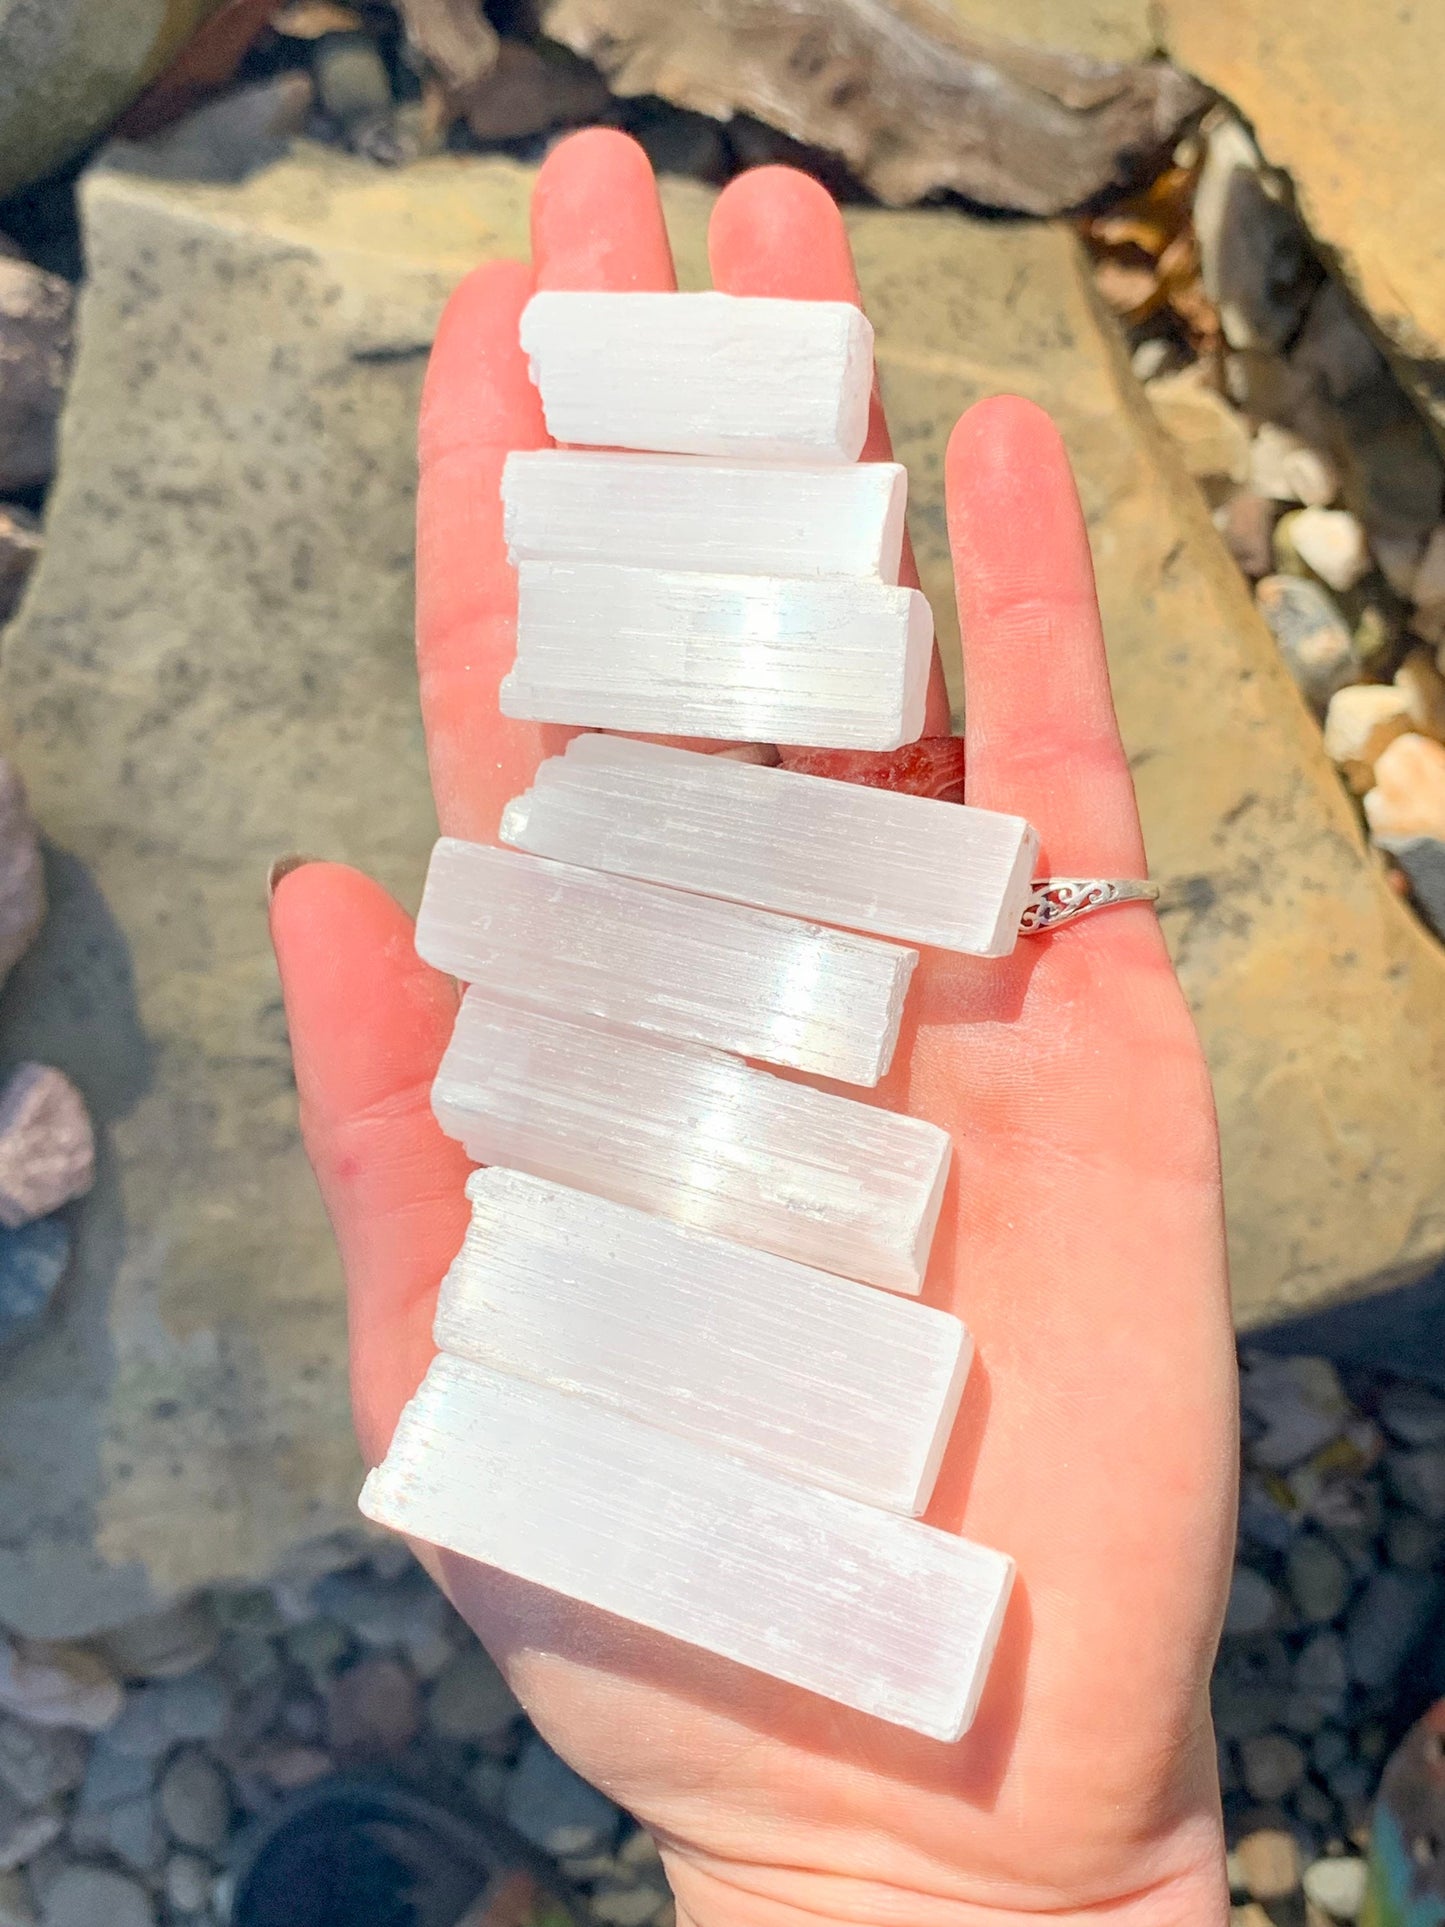 Selenite Stick Log Rough Raw Natural Crystal Gemstone / Cleanse and Charge Crystals, Self, Space / Positive Energy / Good Vibes